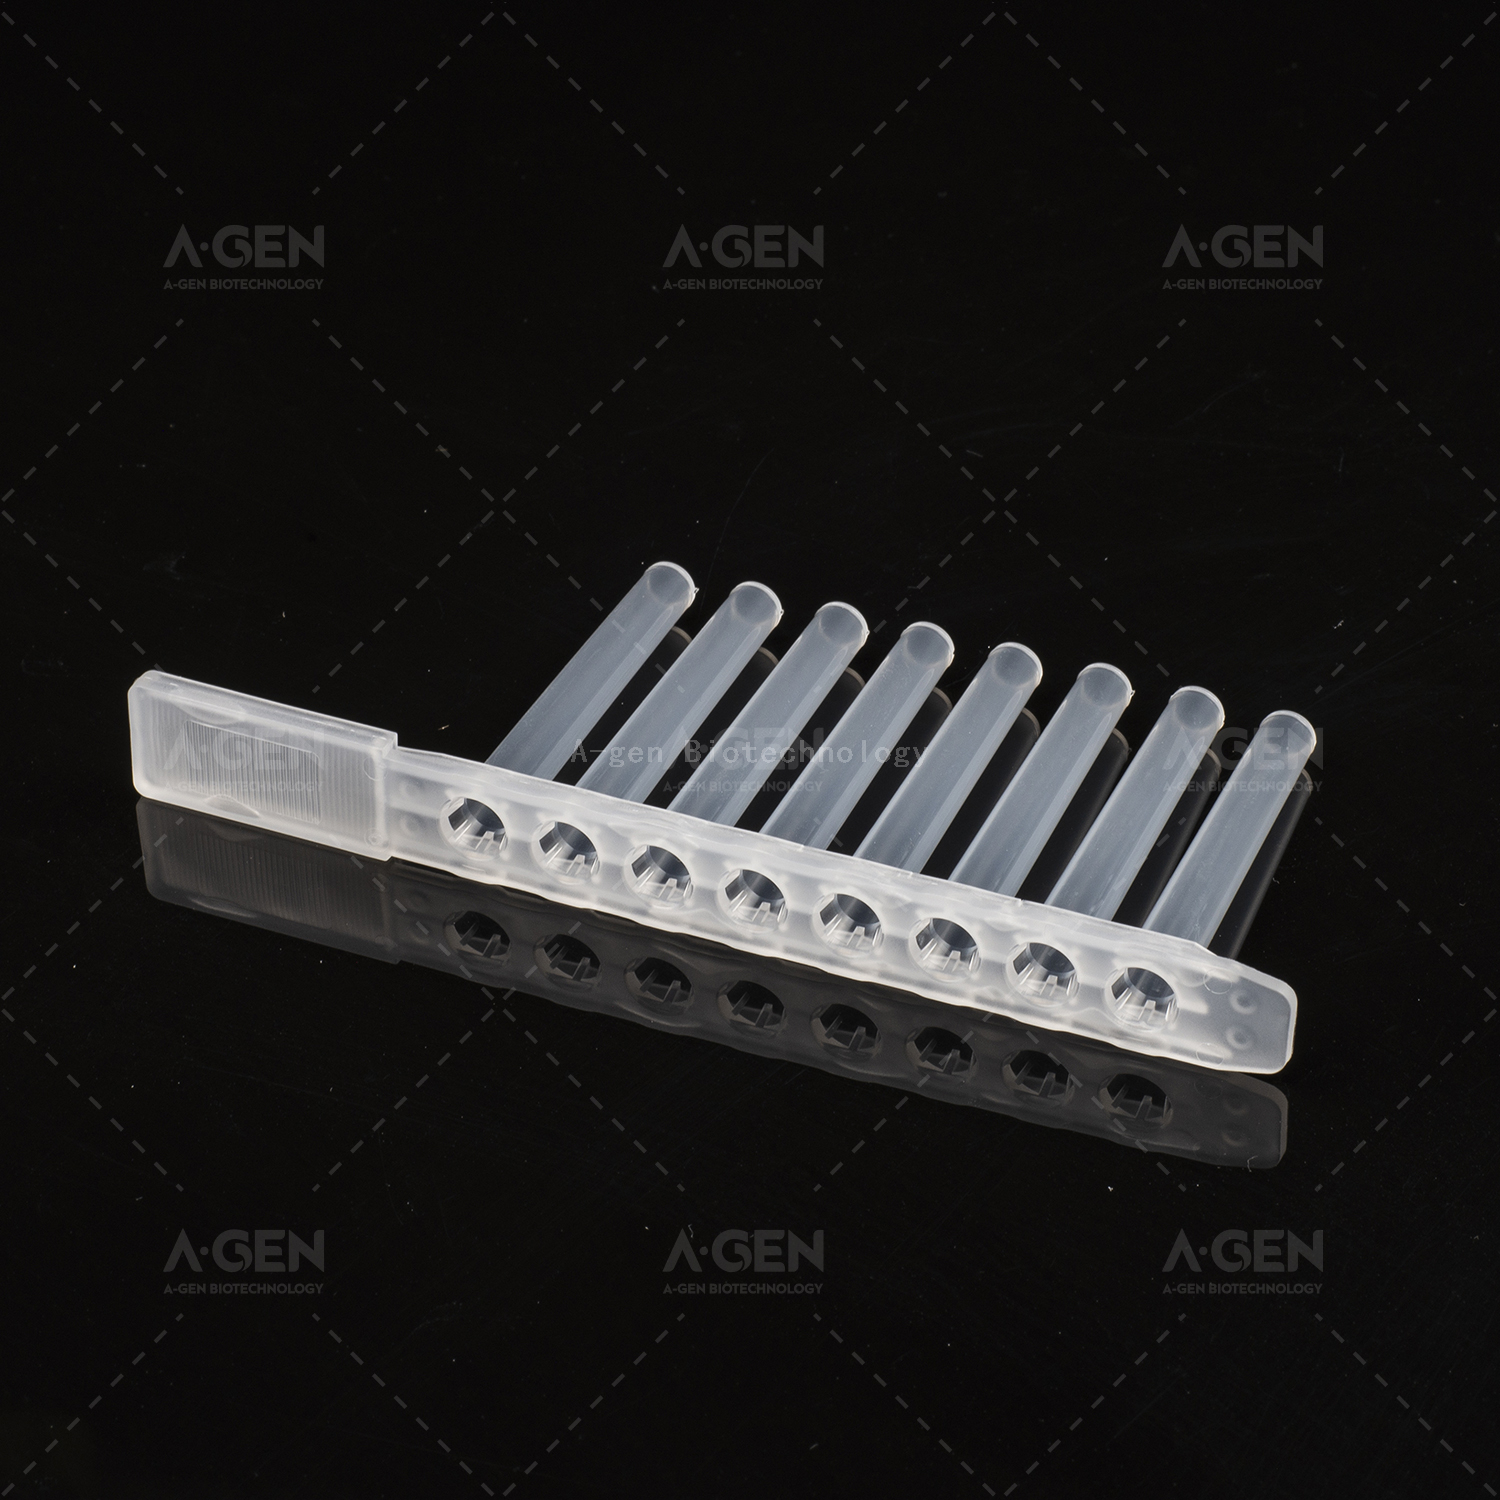 8 Tip combs, suitable for Tianlong NP-968,available for 32-channel pipettes